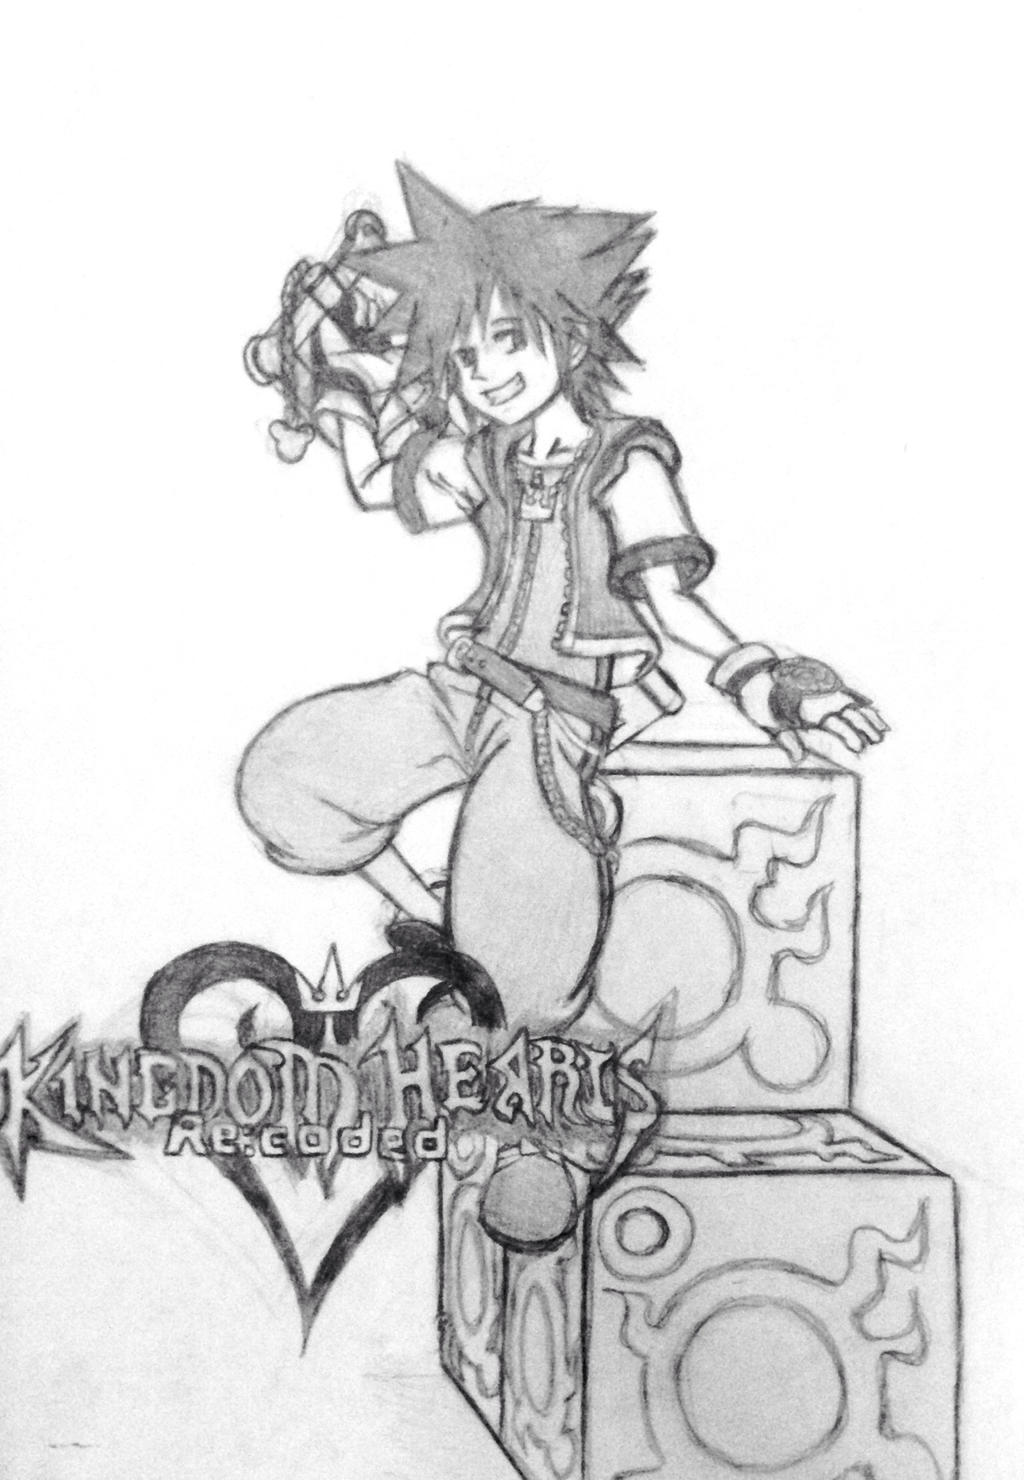 Kingdom Hearts Recoded Cover by Jazzflower95 on DeviantArt